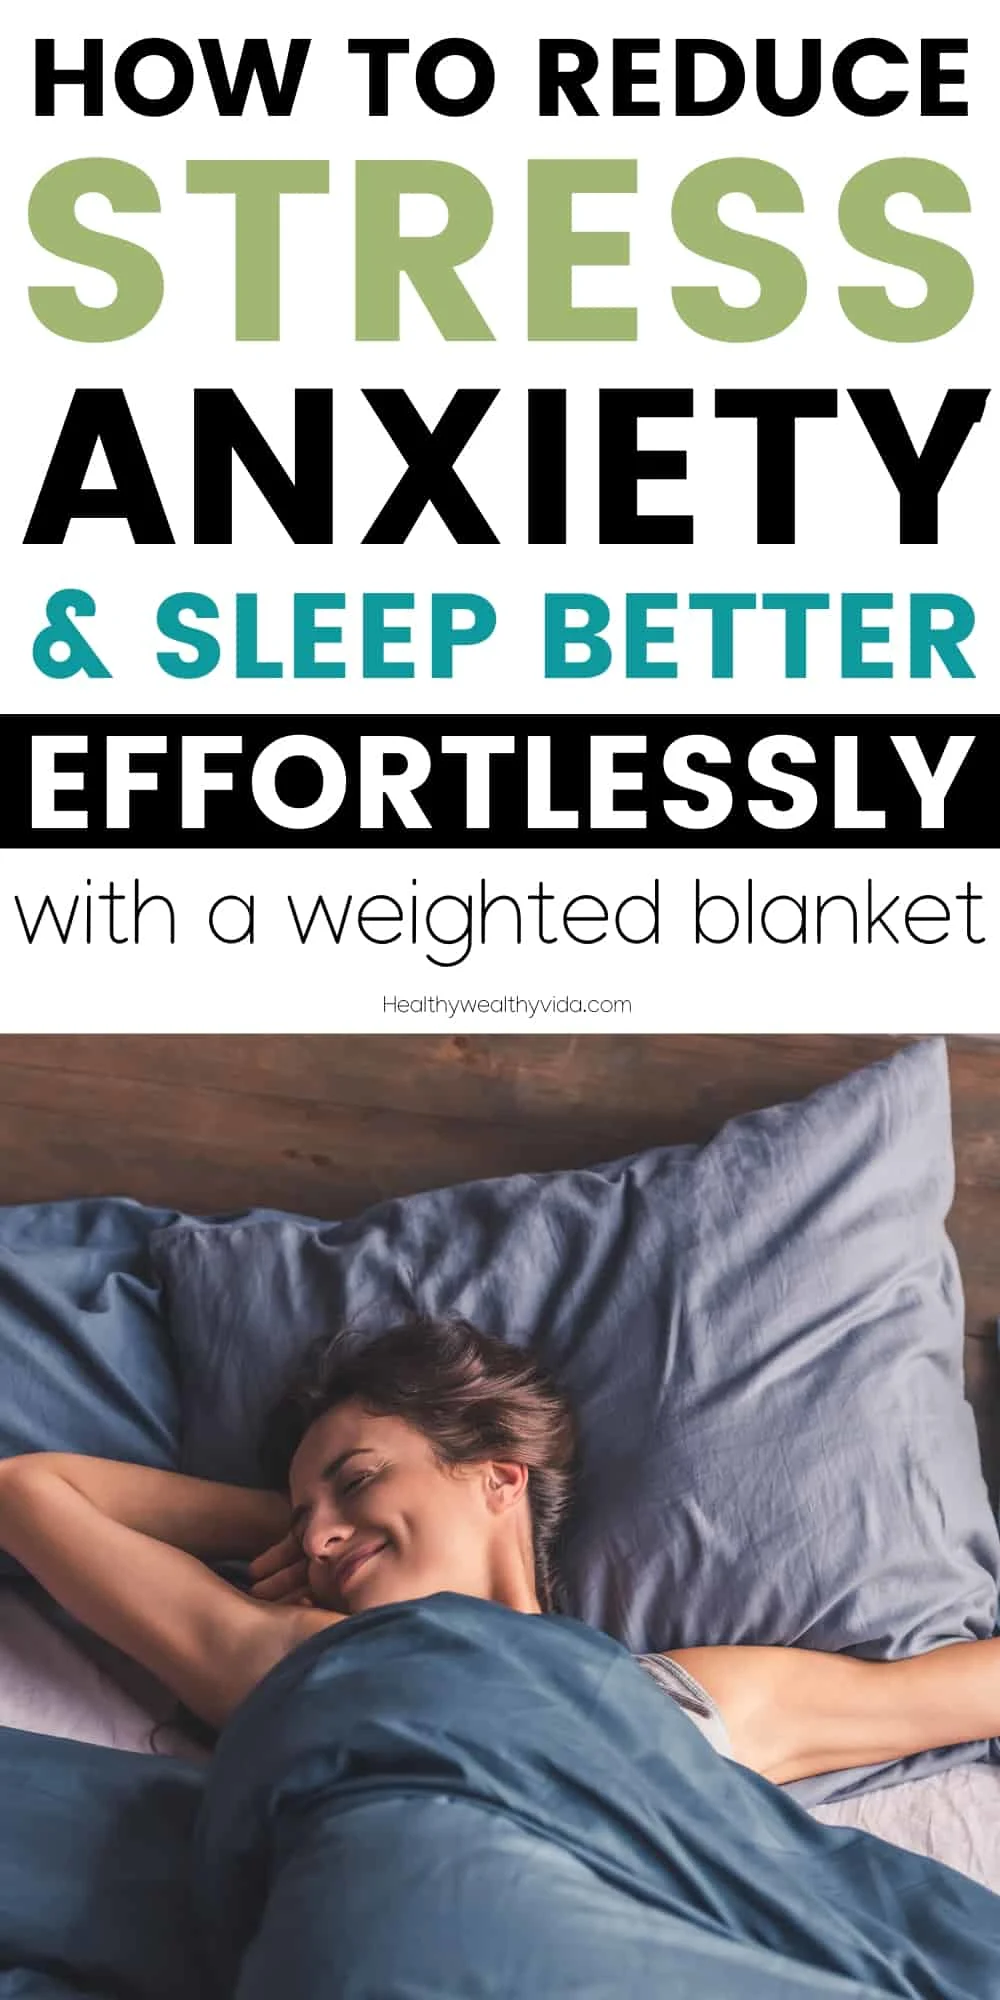 Weighted Blanket For Sleep, anxiety and sress